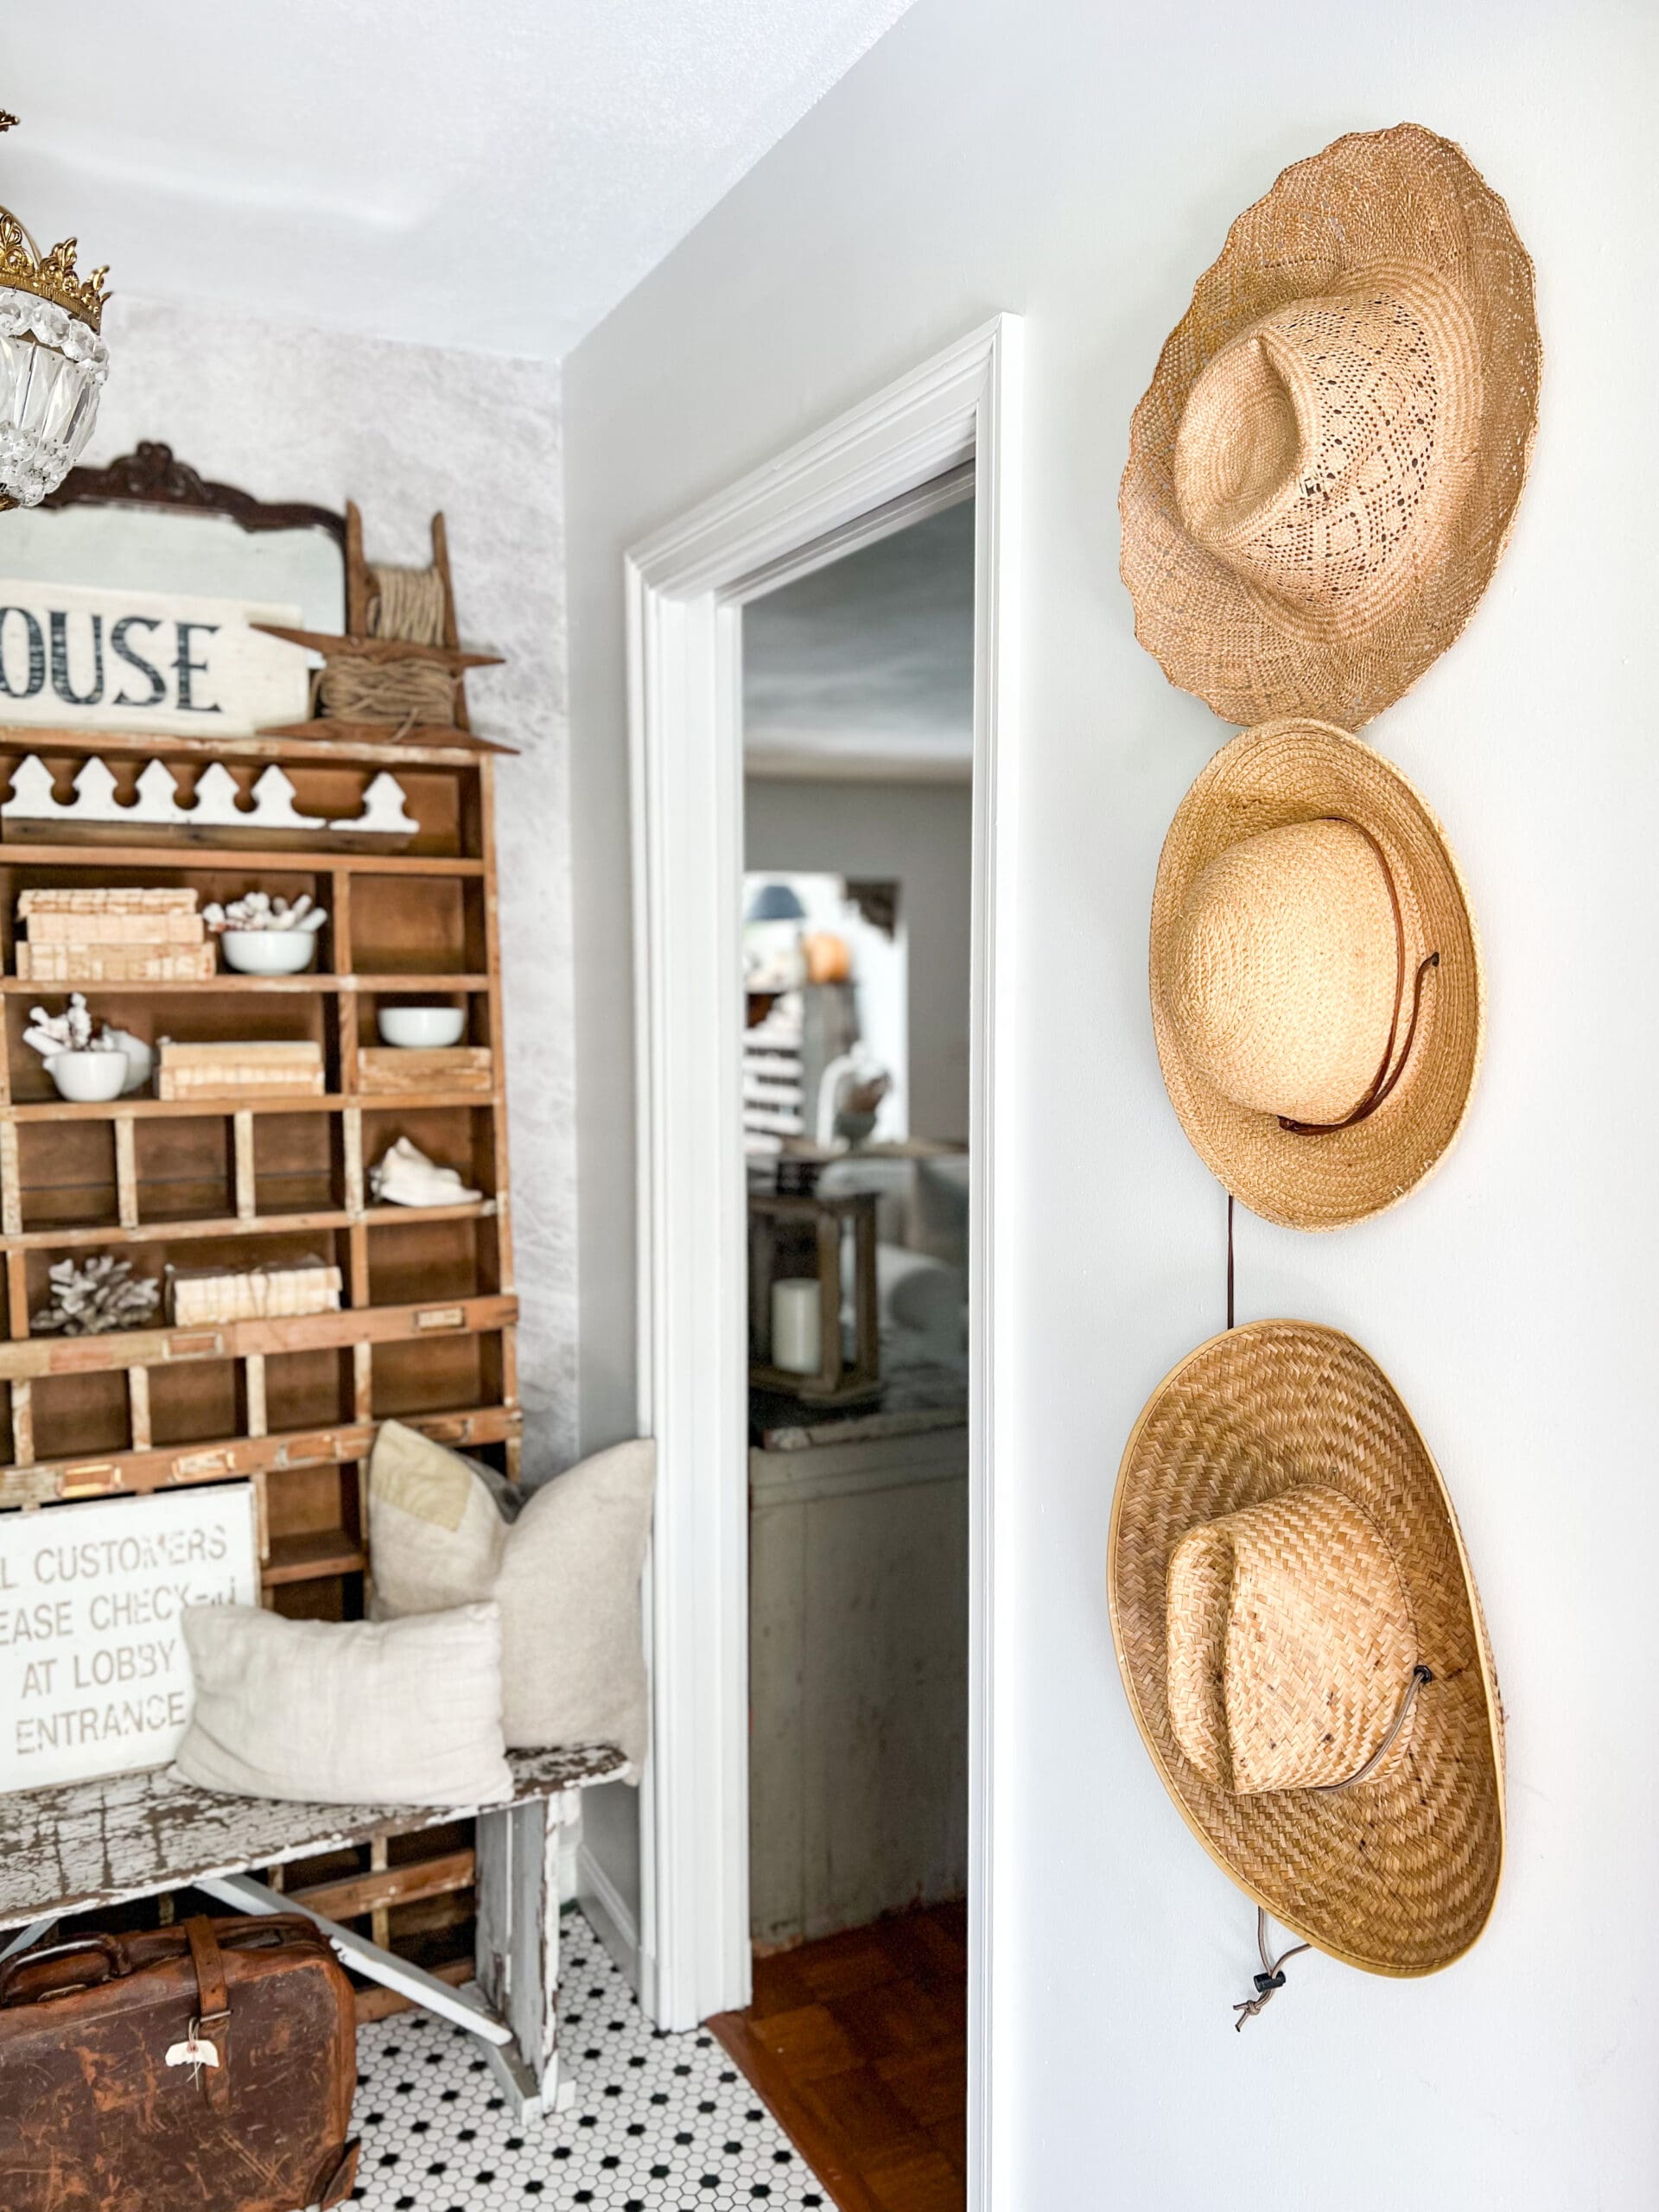 The Latest Trends in Vintage Home Decor | Courtney Warren Home